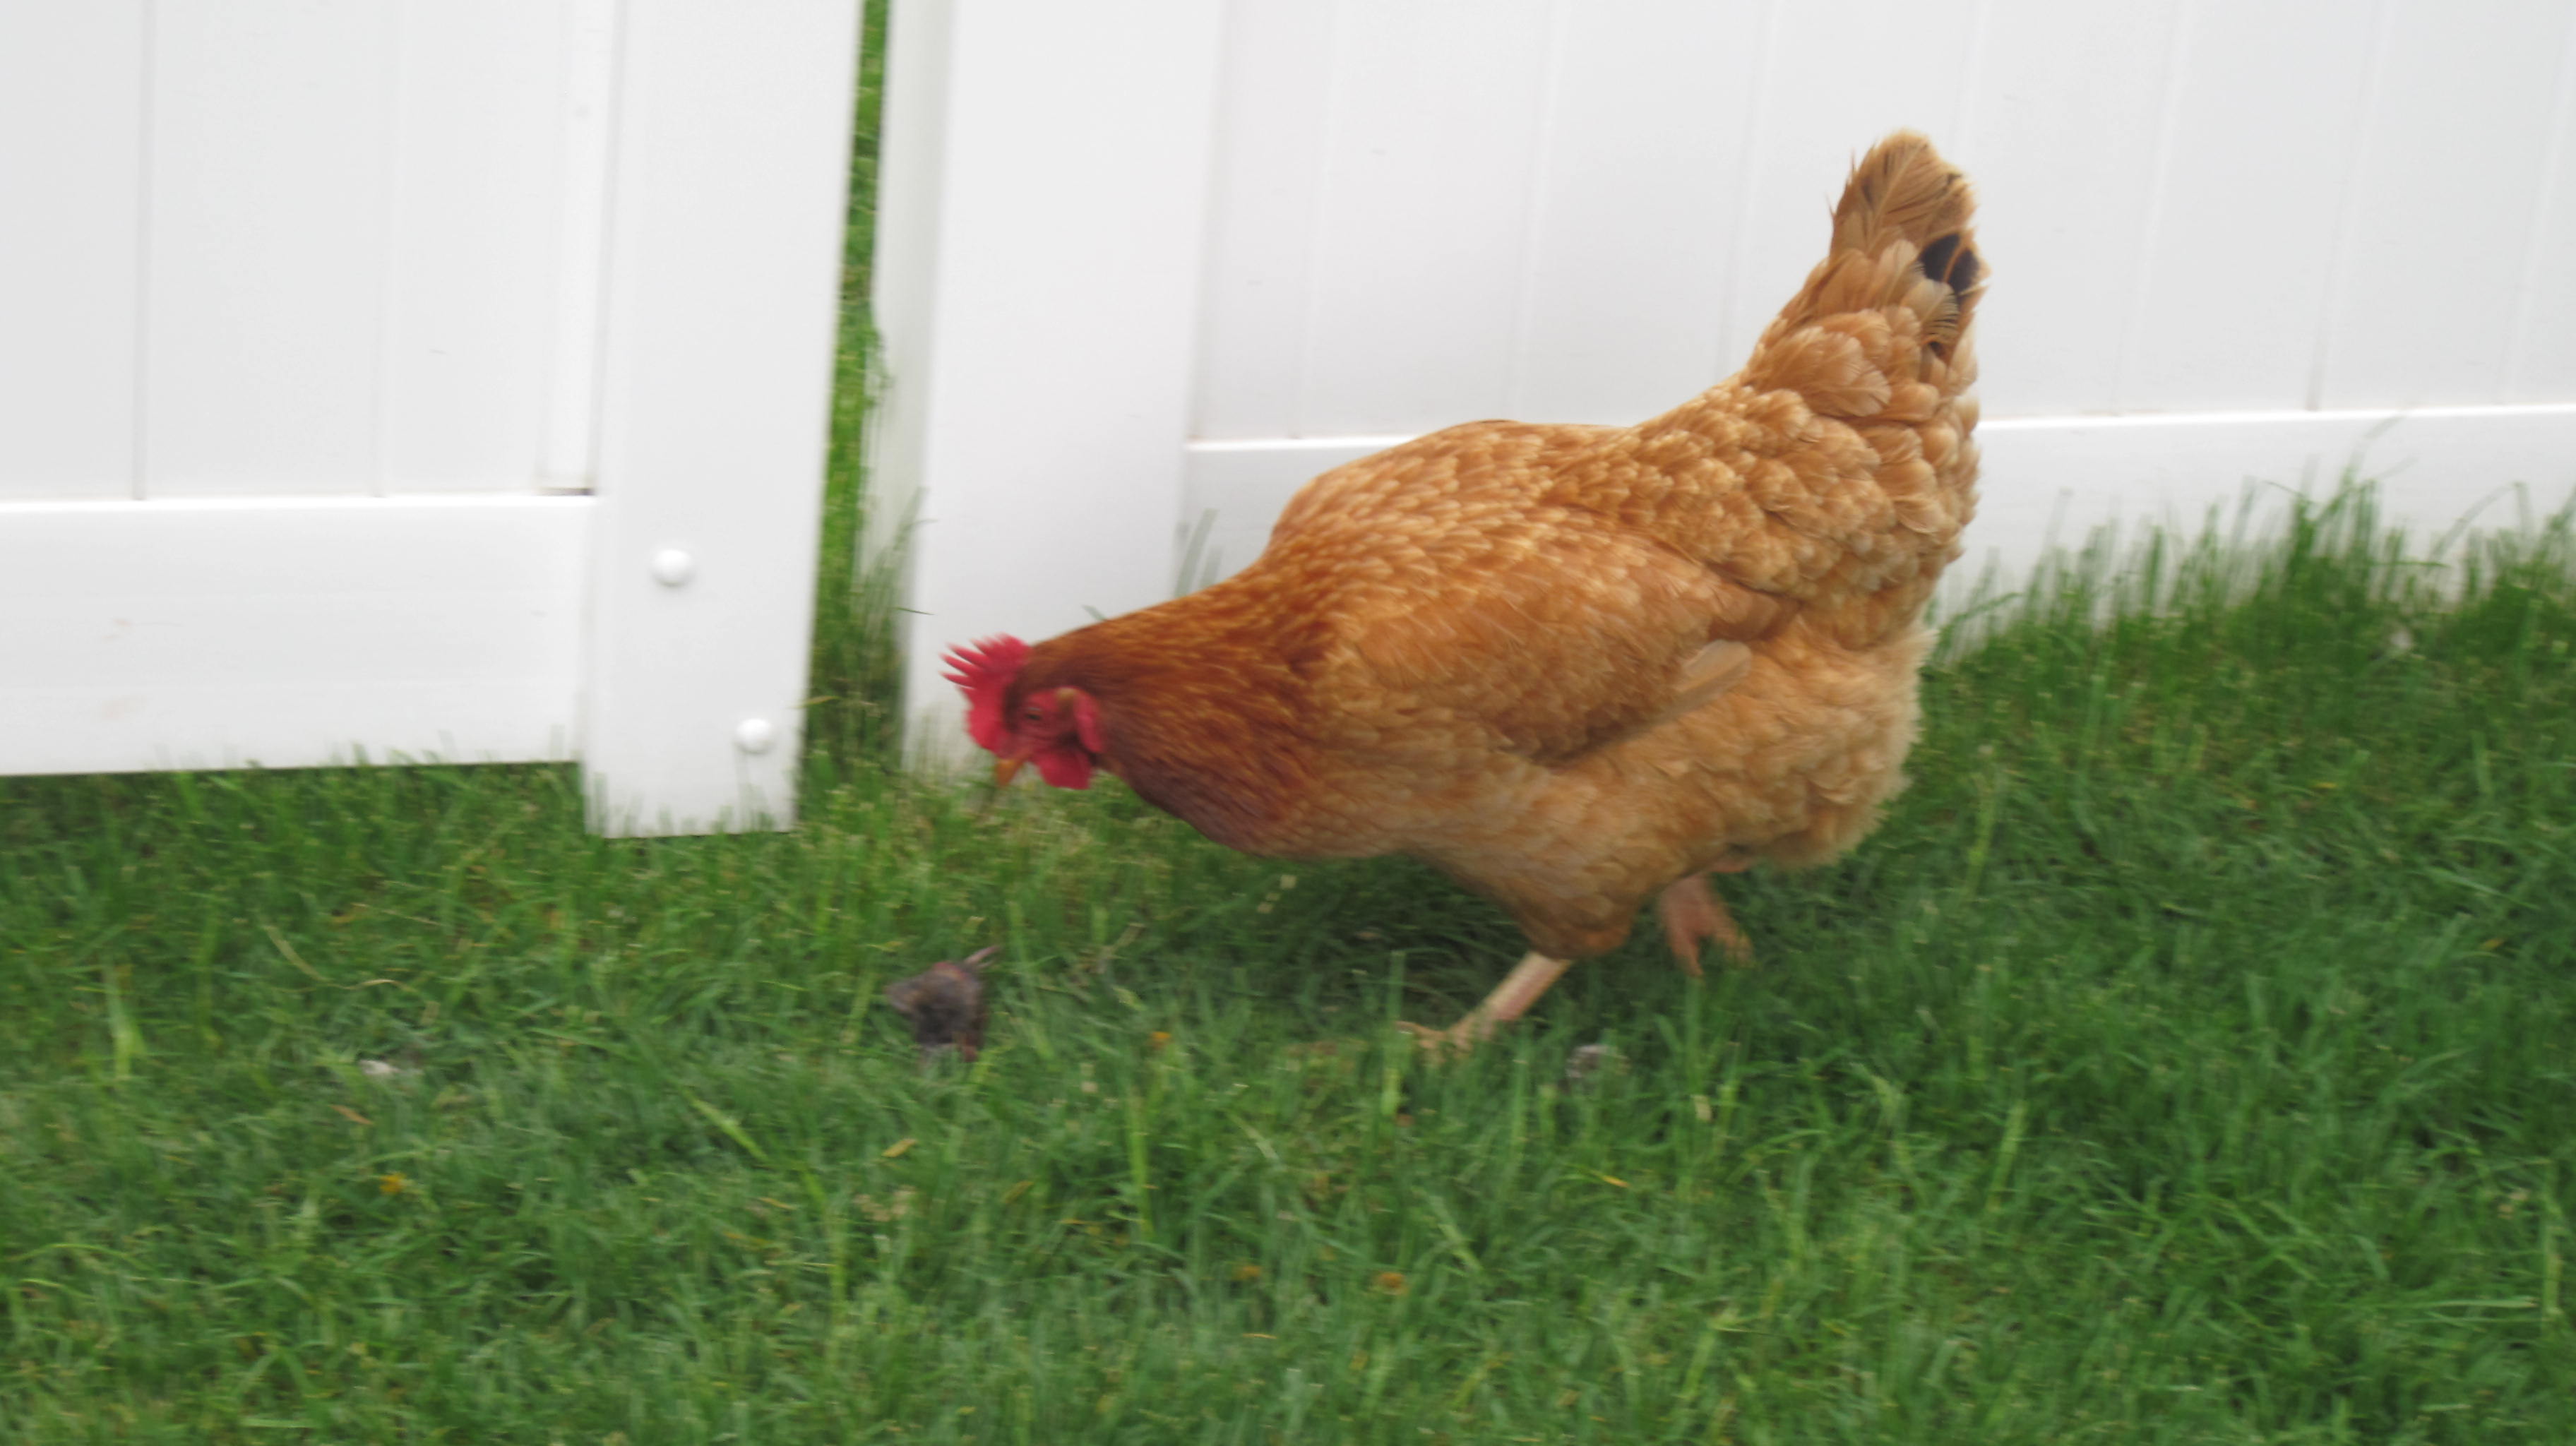 chickens eating mice | Lifetransplanet